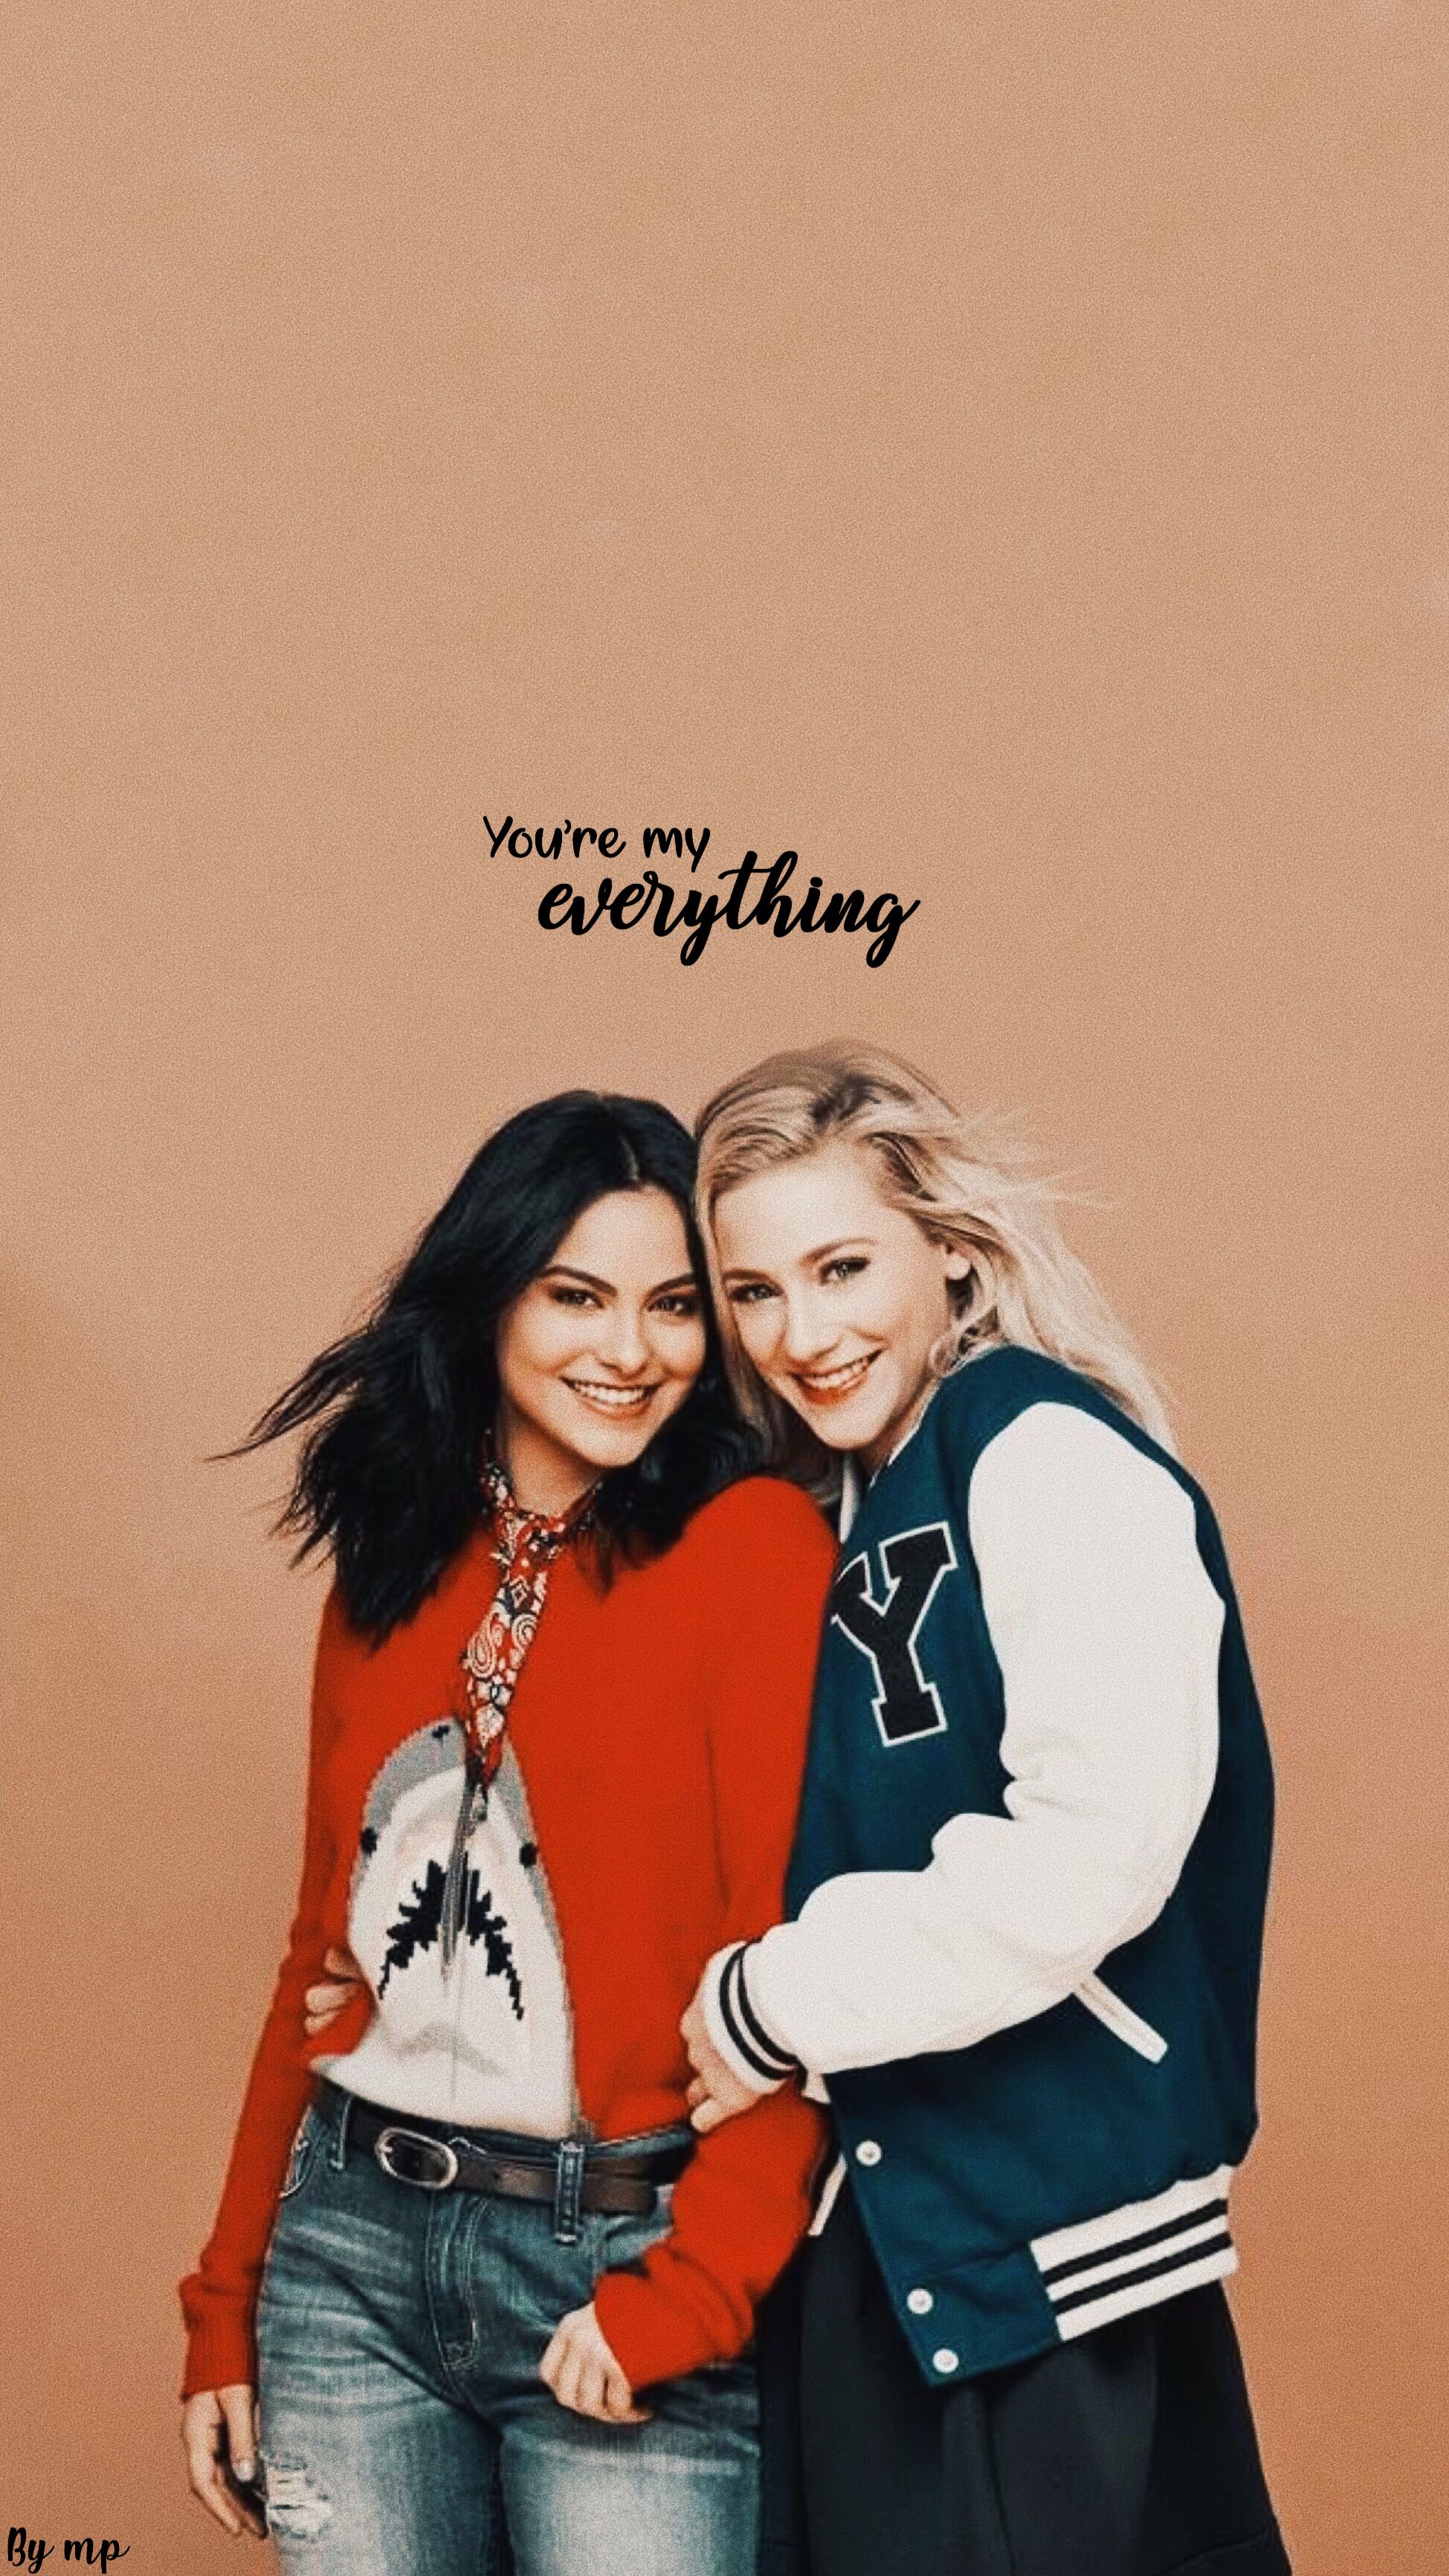 Camilamendes - Camila Mendes And Lili Reinhart Friendship , HD Wallpaper & Backgrounds